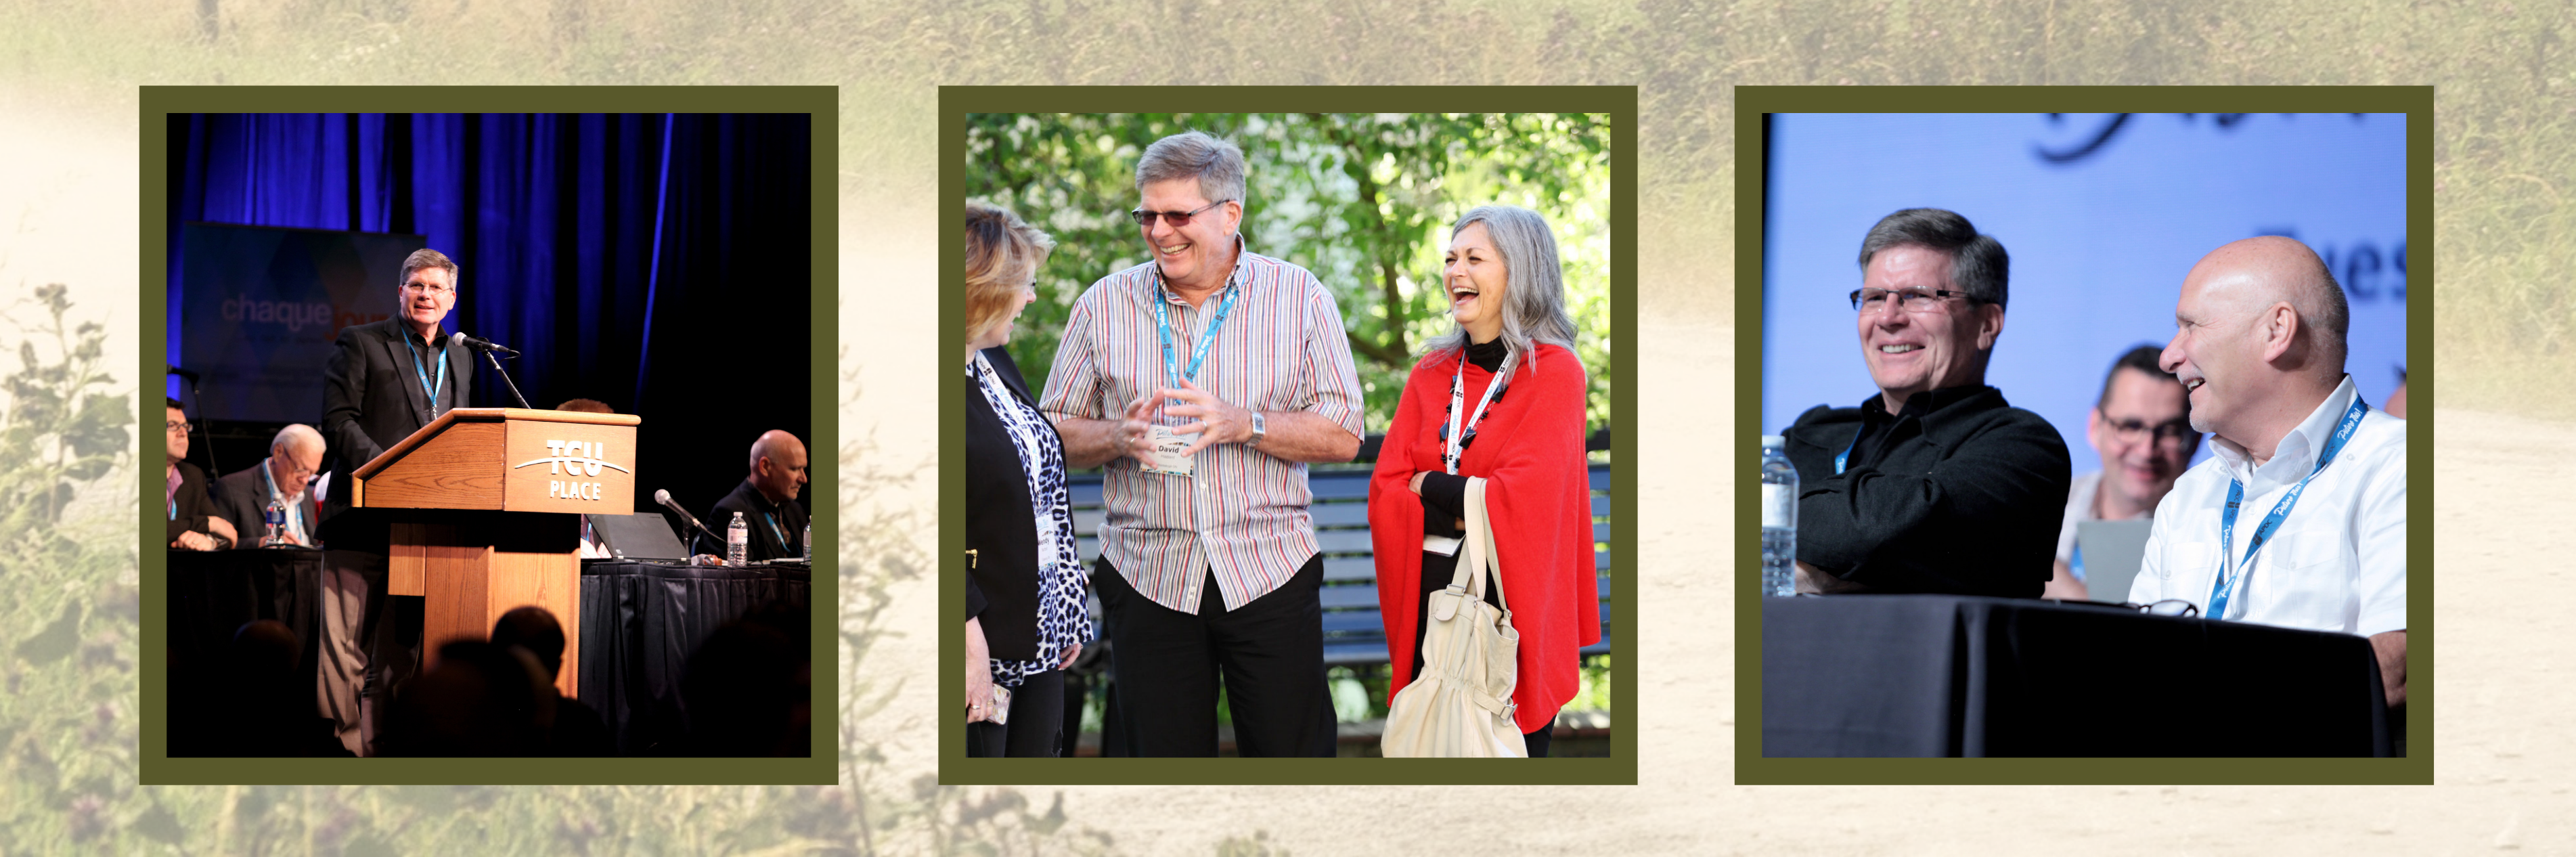 Three photos from General Conference 2016 and 2018. David stand at the podium speaking (2018). David outside laughing with wife Stacey (2016). David seated with Murray listening and smiling (2018).